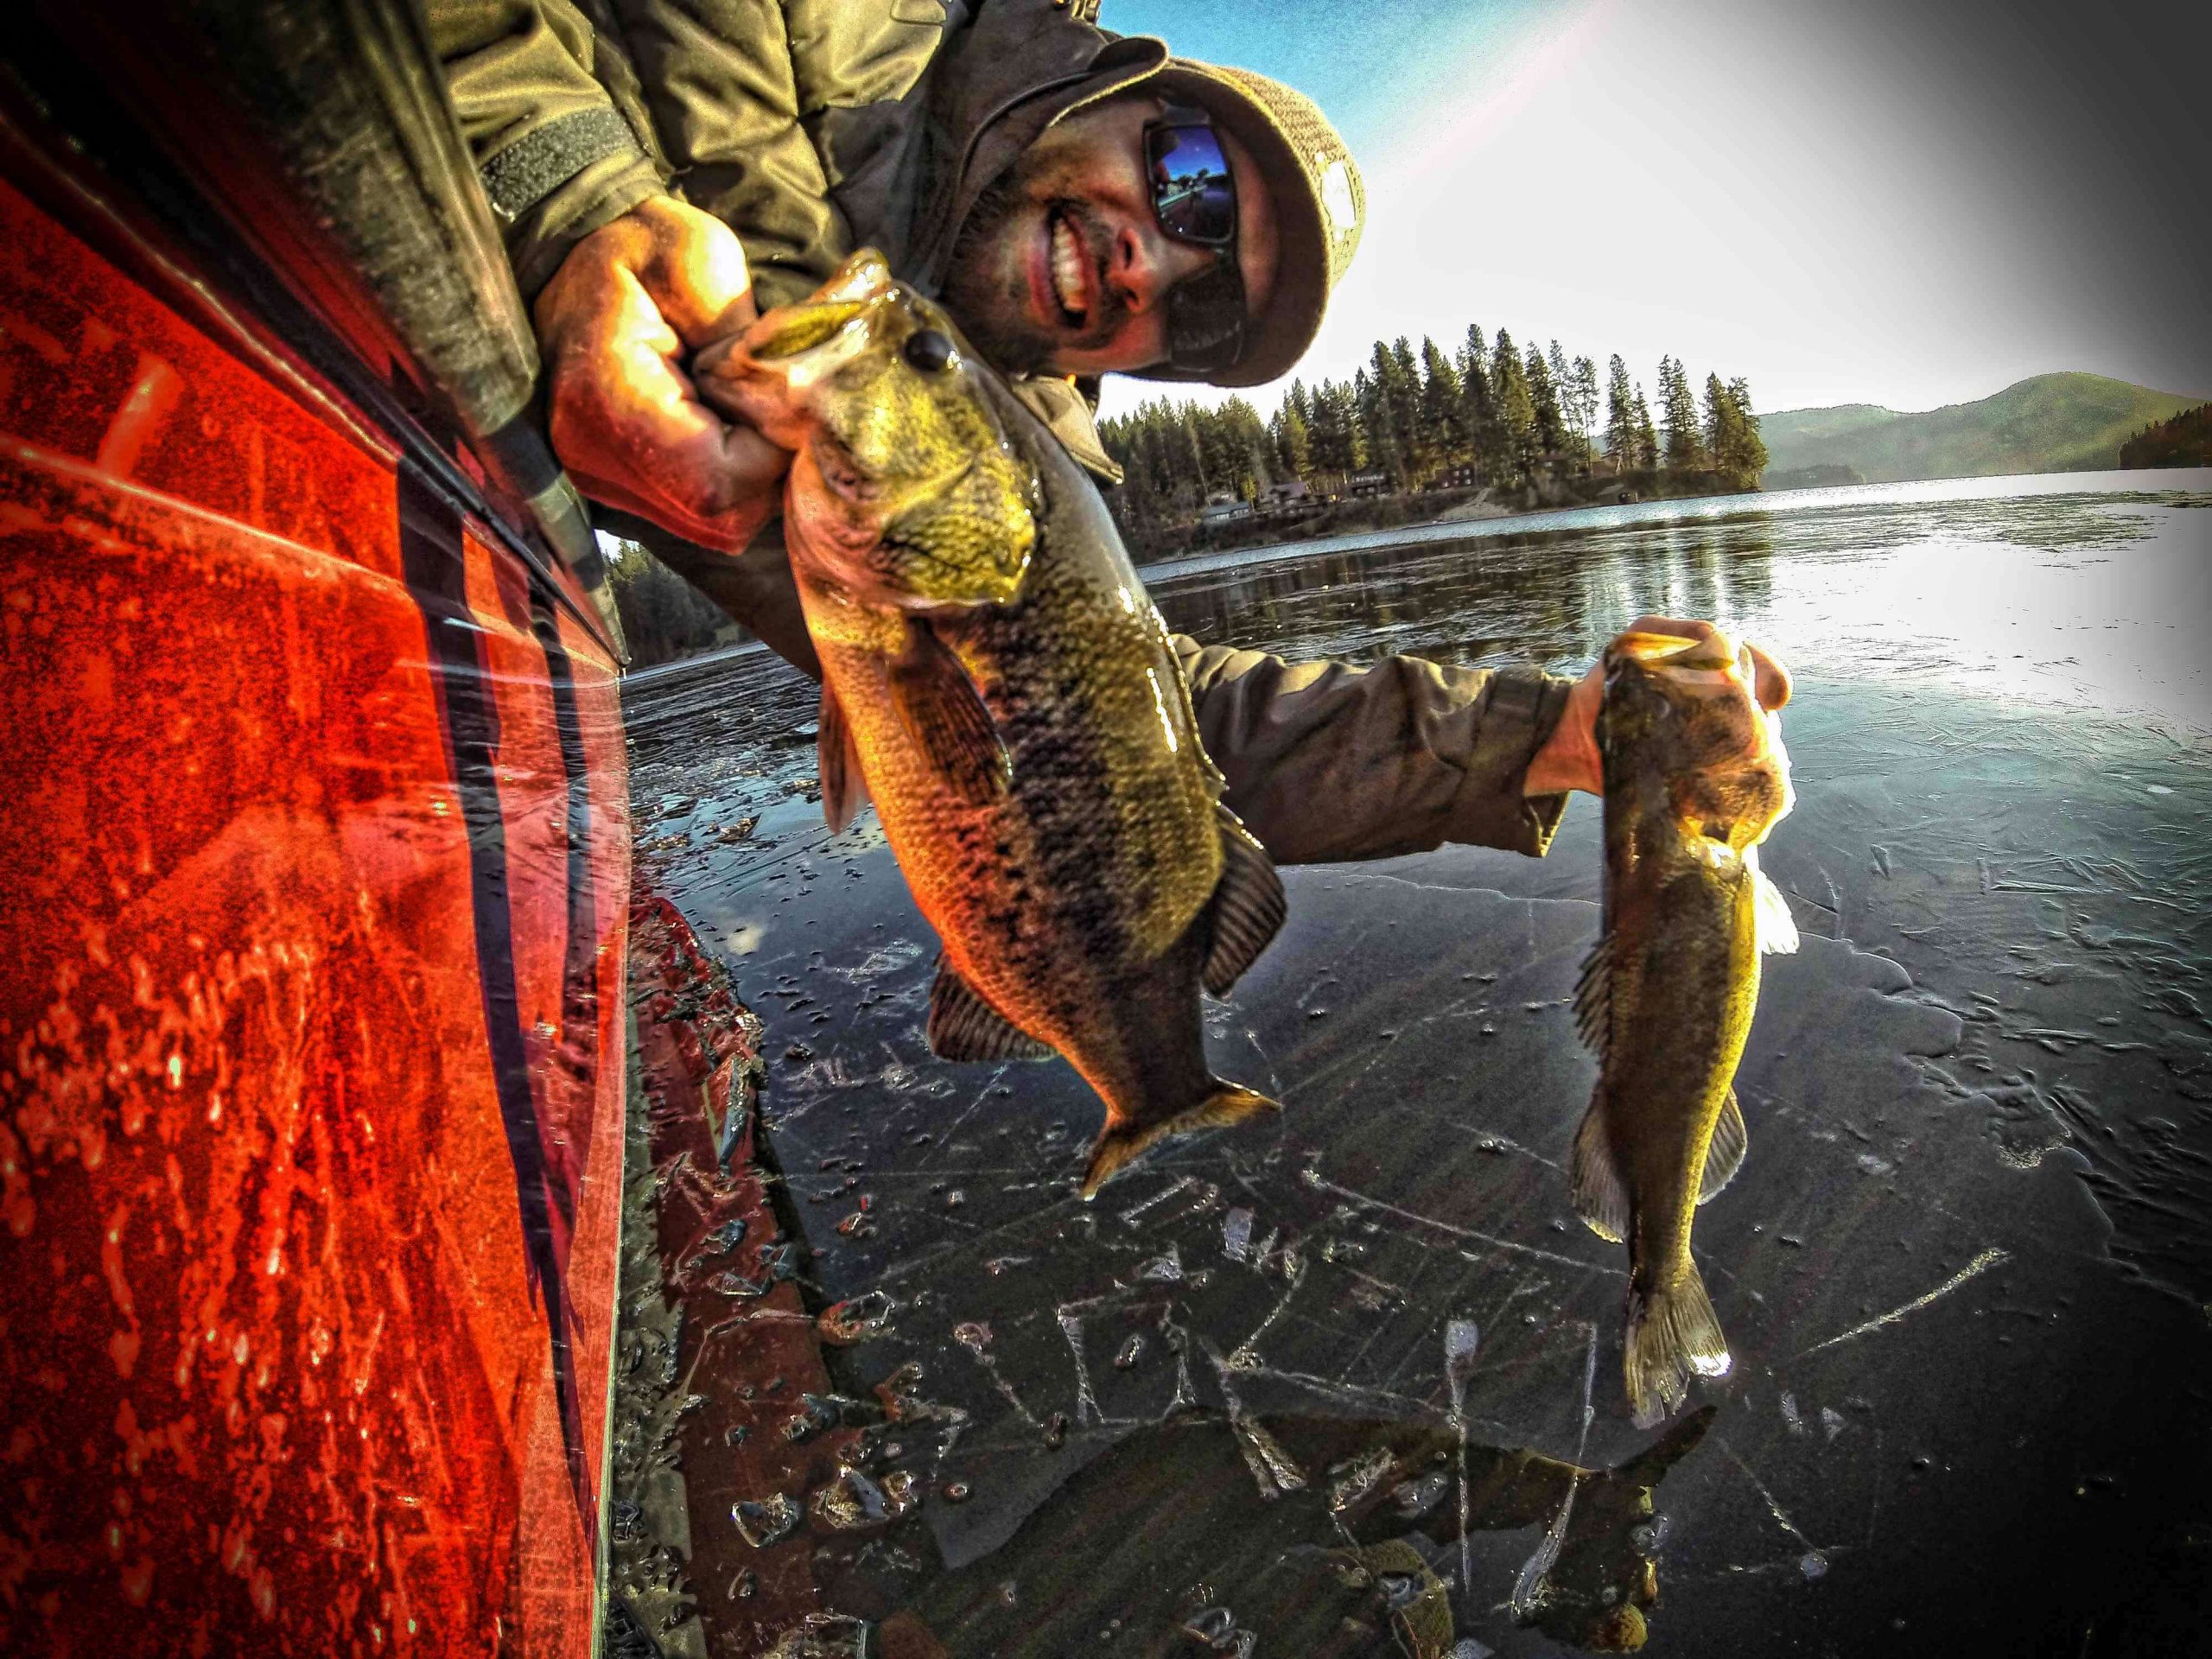 The temperature was in single digits in Idaho the first week in December, but Palaniuk and his local fishing partner wanted to go fishing, even if it meant breaking some ice on Haden Lake. They did just that and Palaniuk displays the results. 